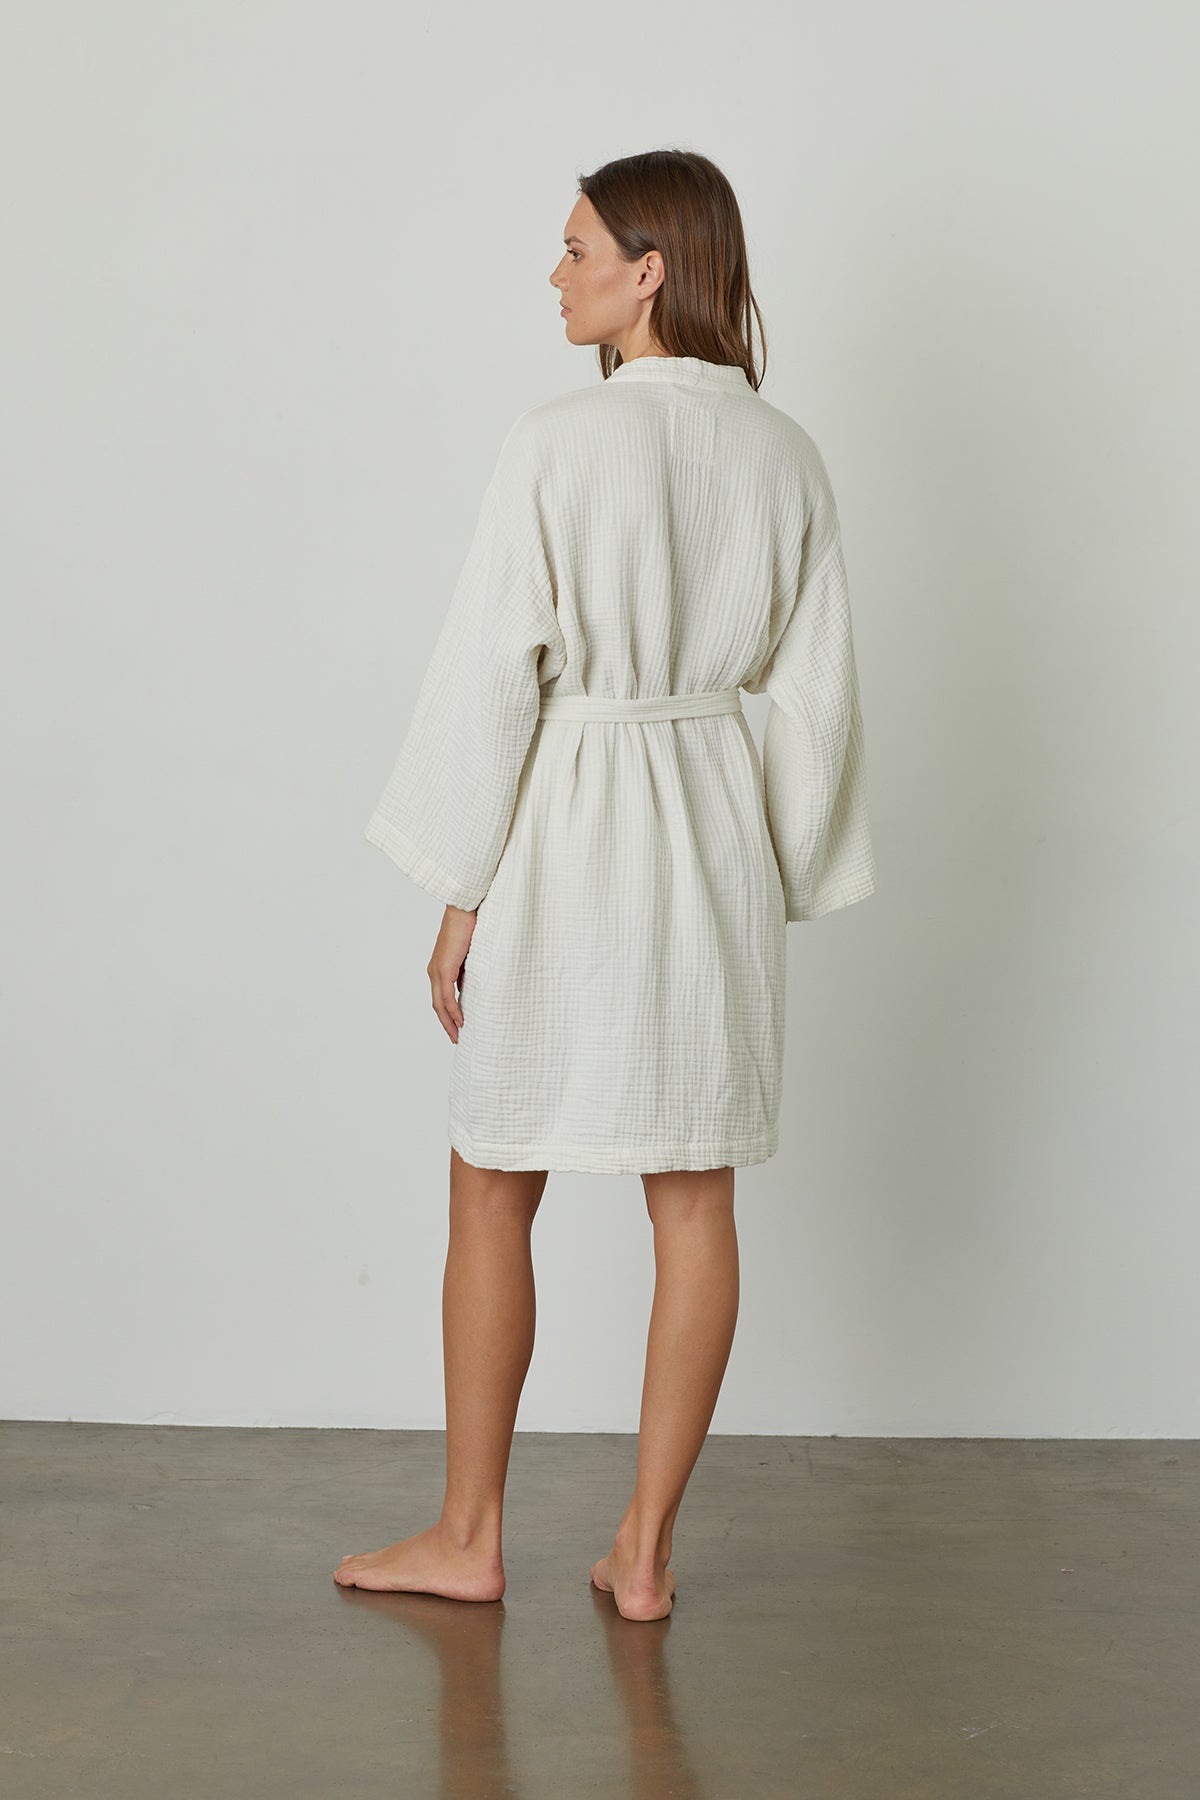 The back view of a woman wearing a MINI COTTON GAUZE ROBE made by Jenny Graham Home, with soft texture.-23555997532353